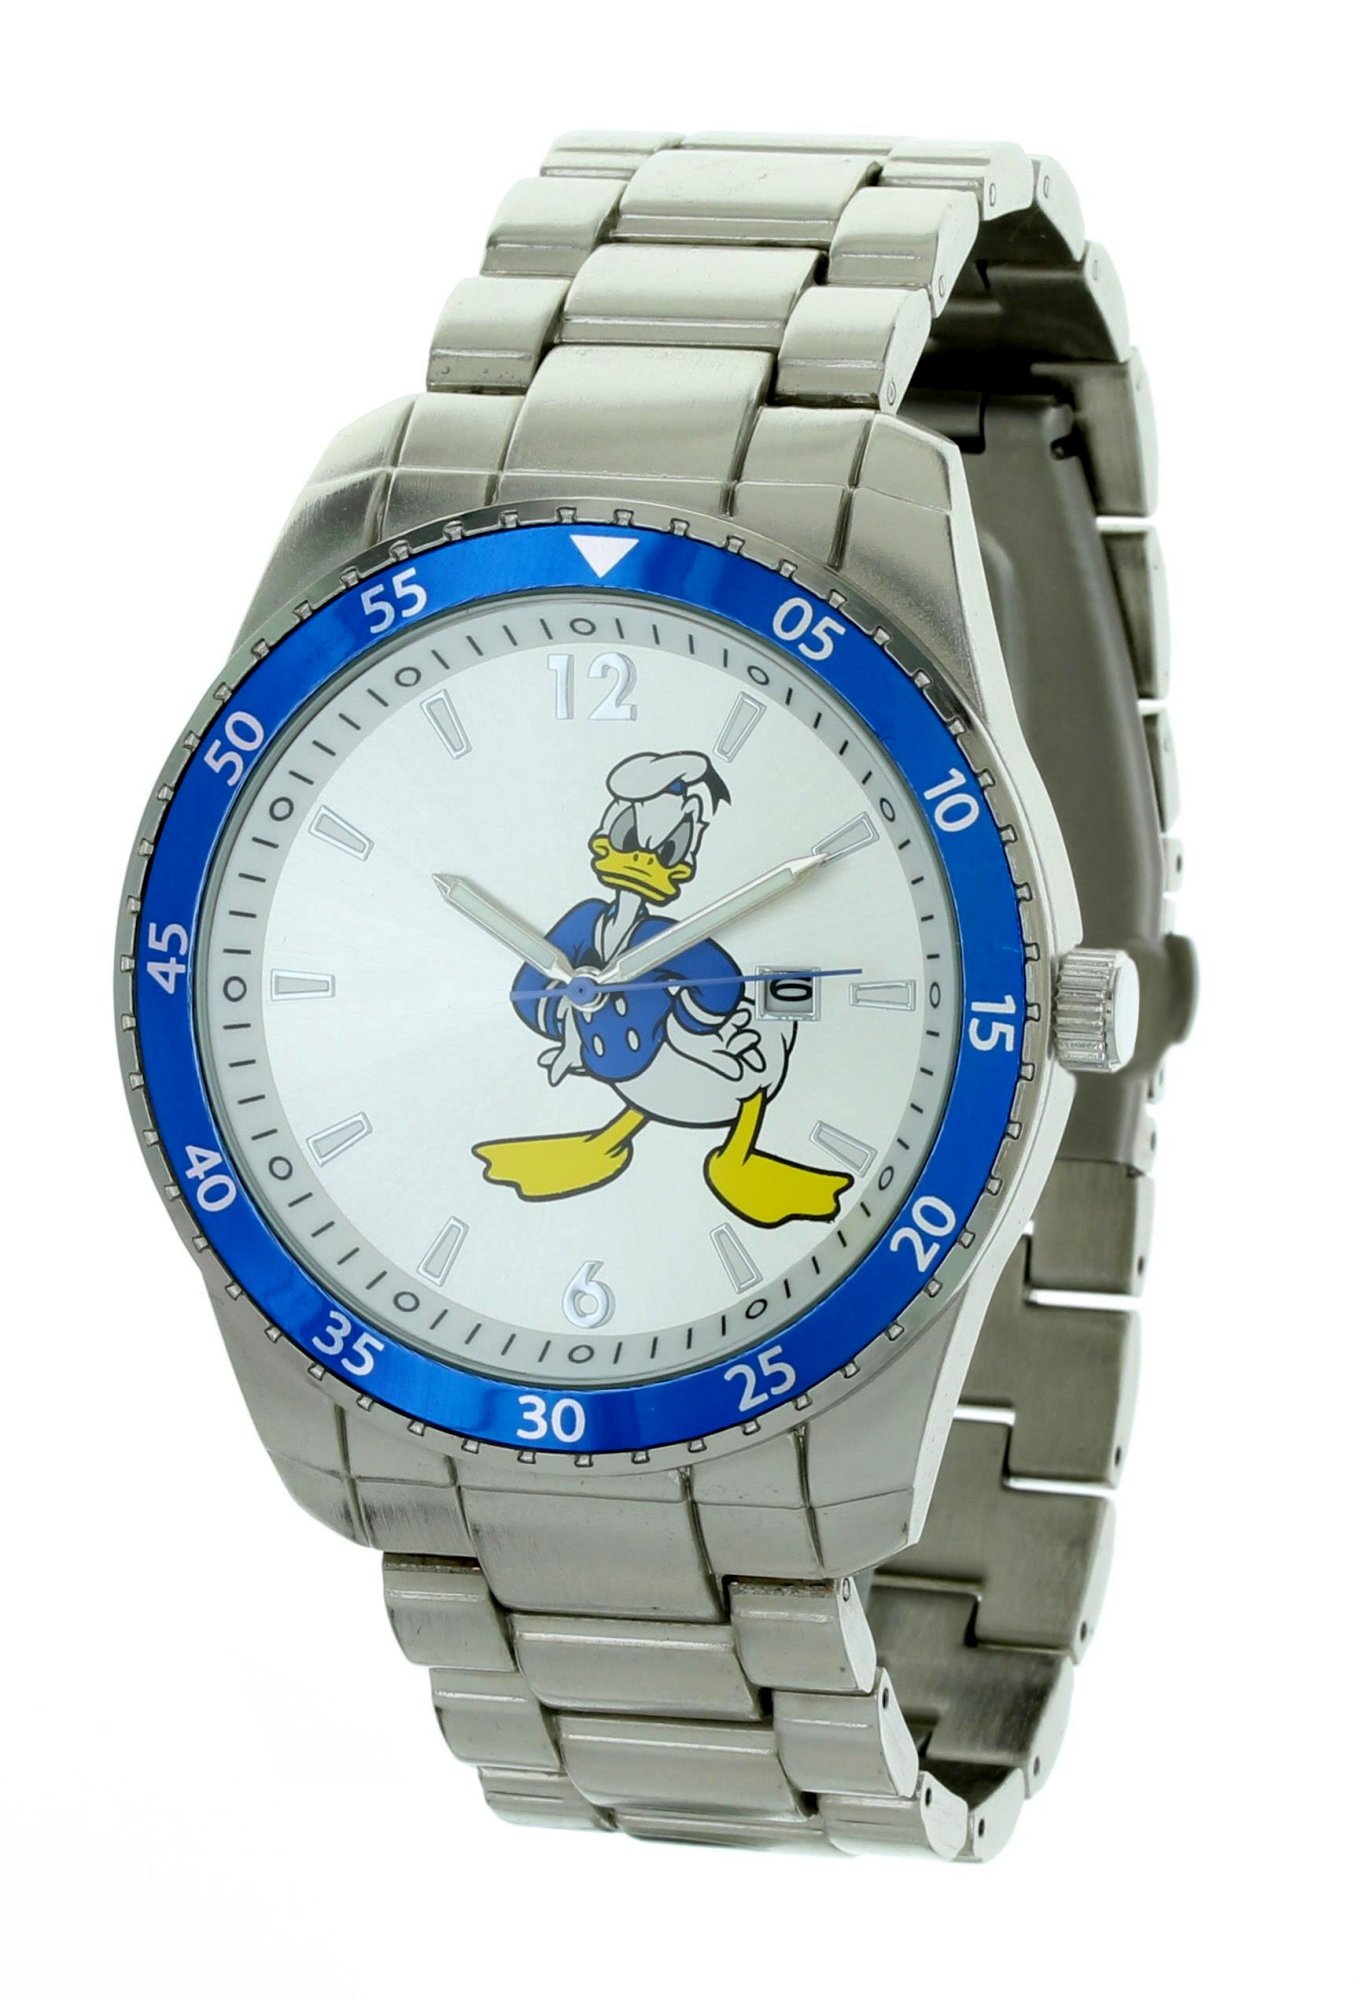 Model: Men's Disney Donald Duck Silver Dial Metal Strap Watch with Blue Bezel and Date